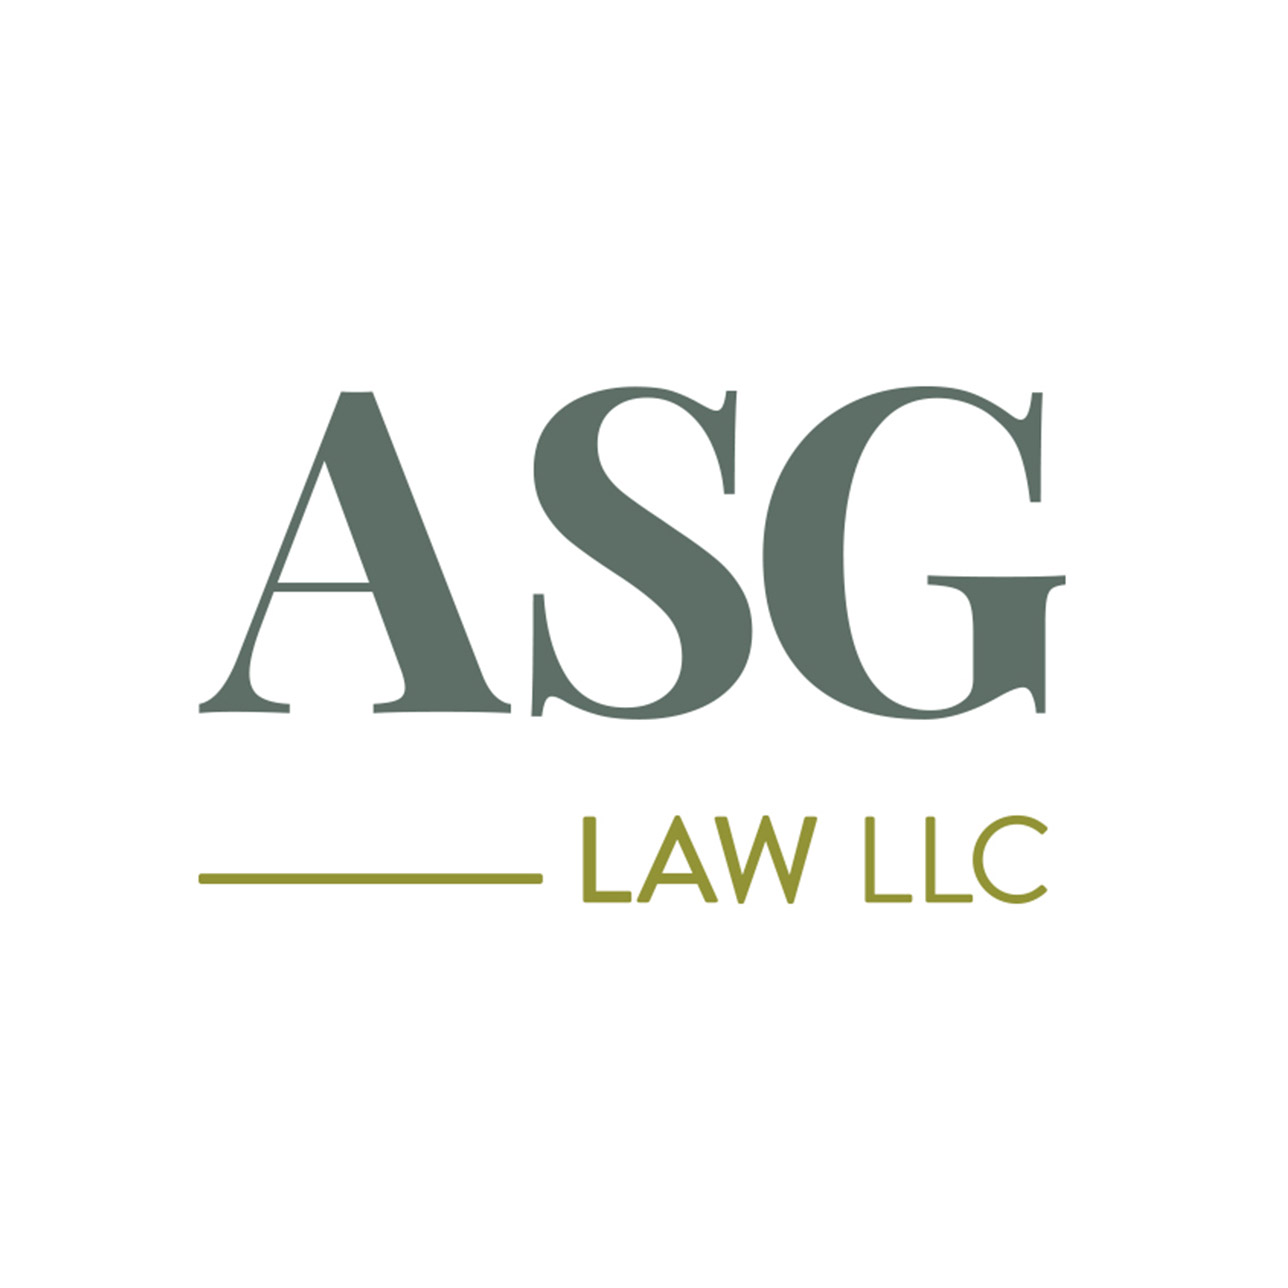 ASG Law firm